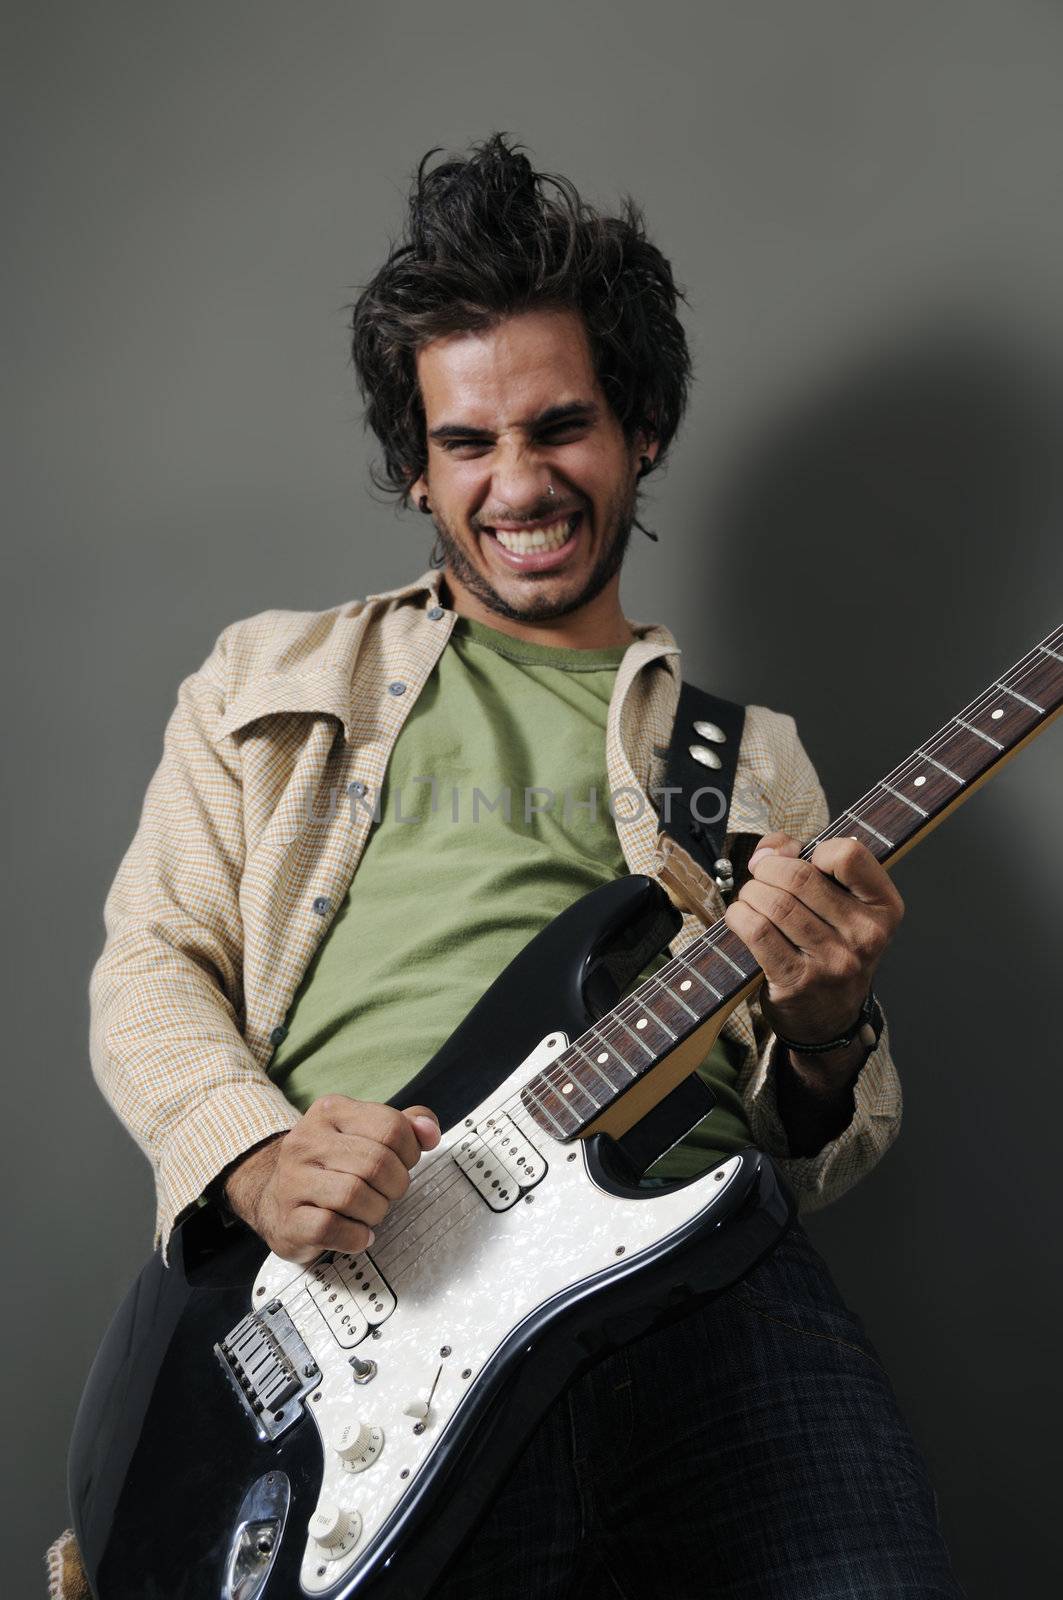 Portrait of young guitarrist with funny expression